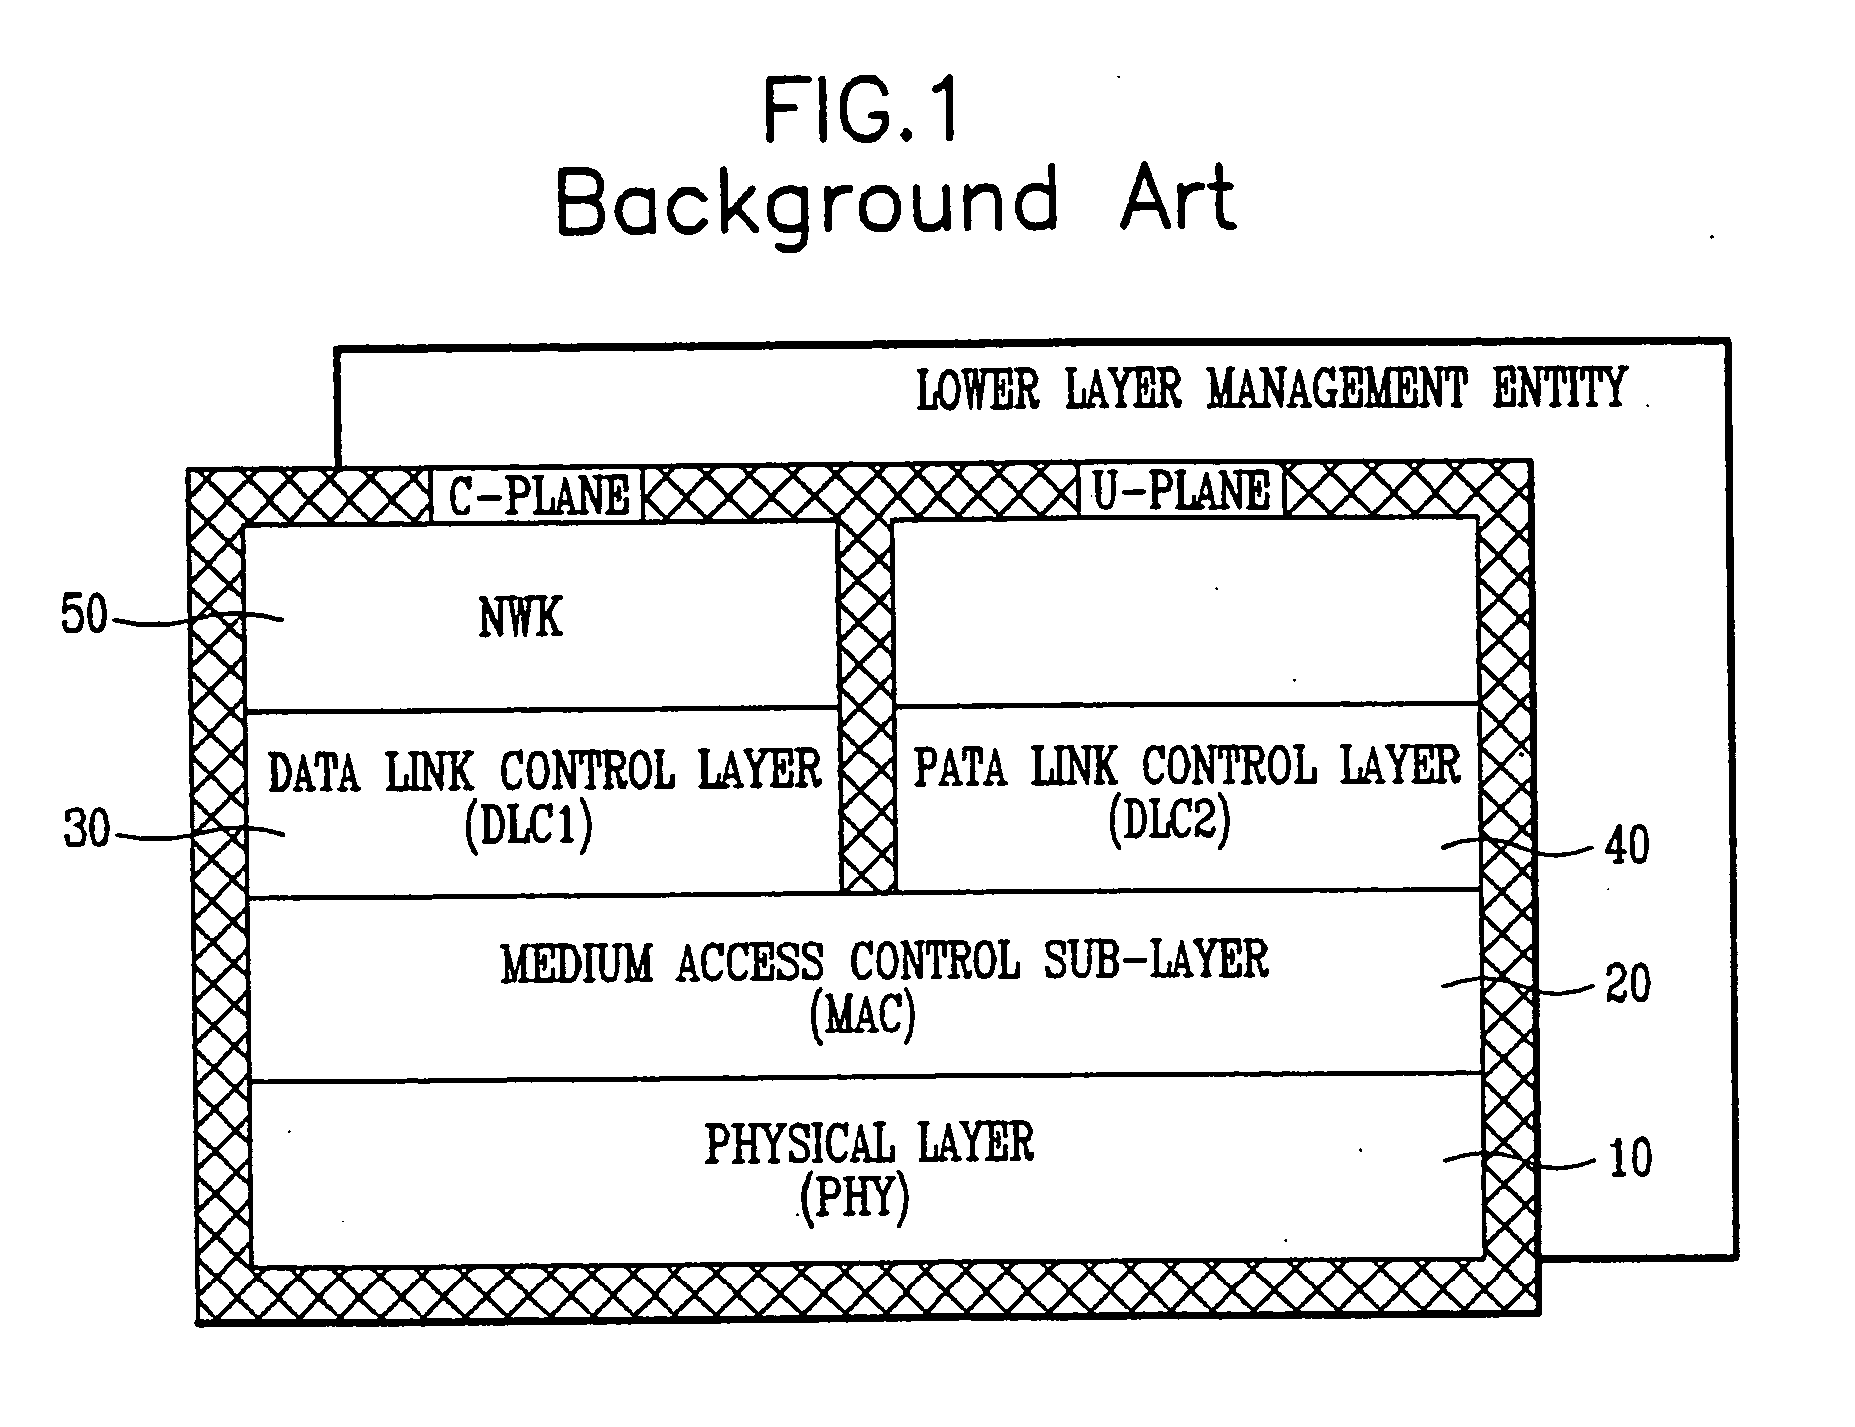 Communication system with improved medium access control sub-layer